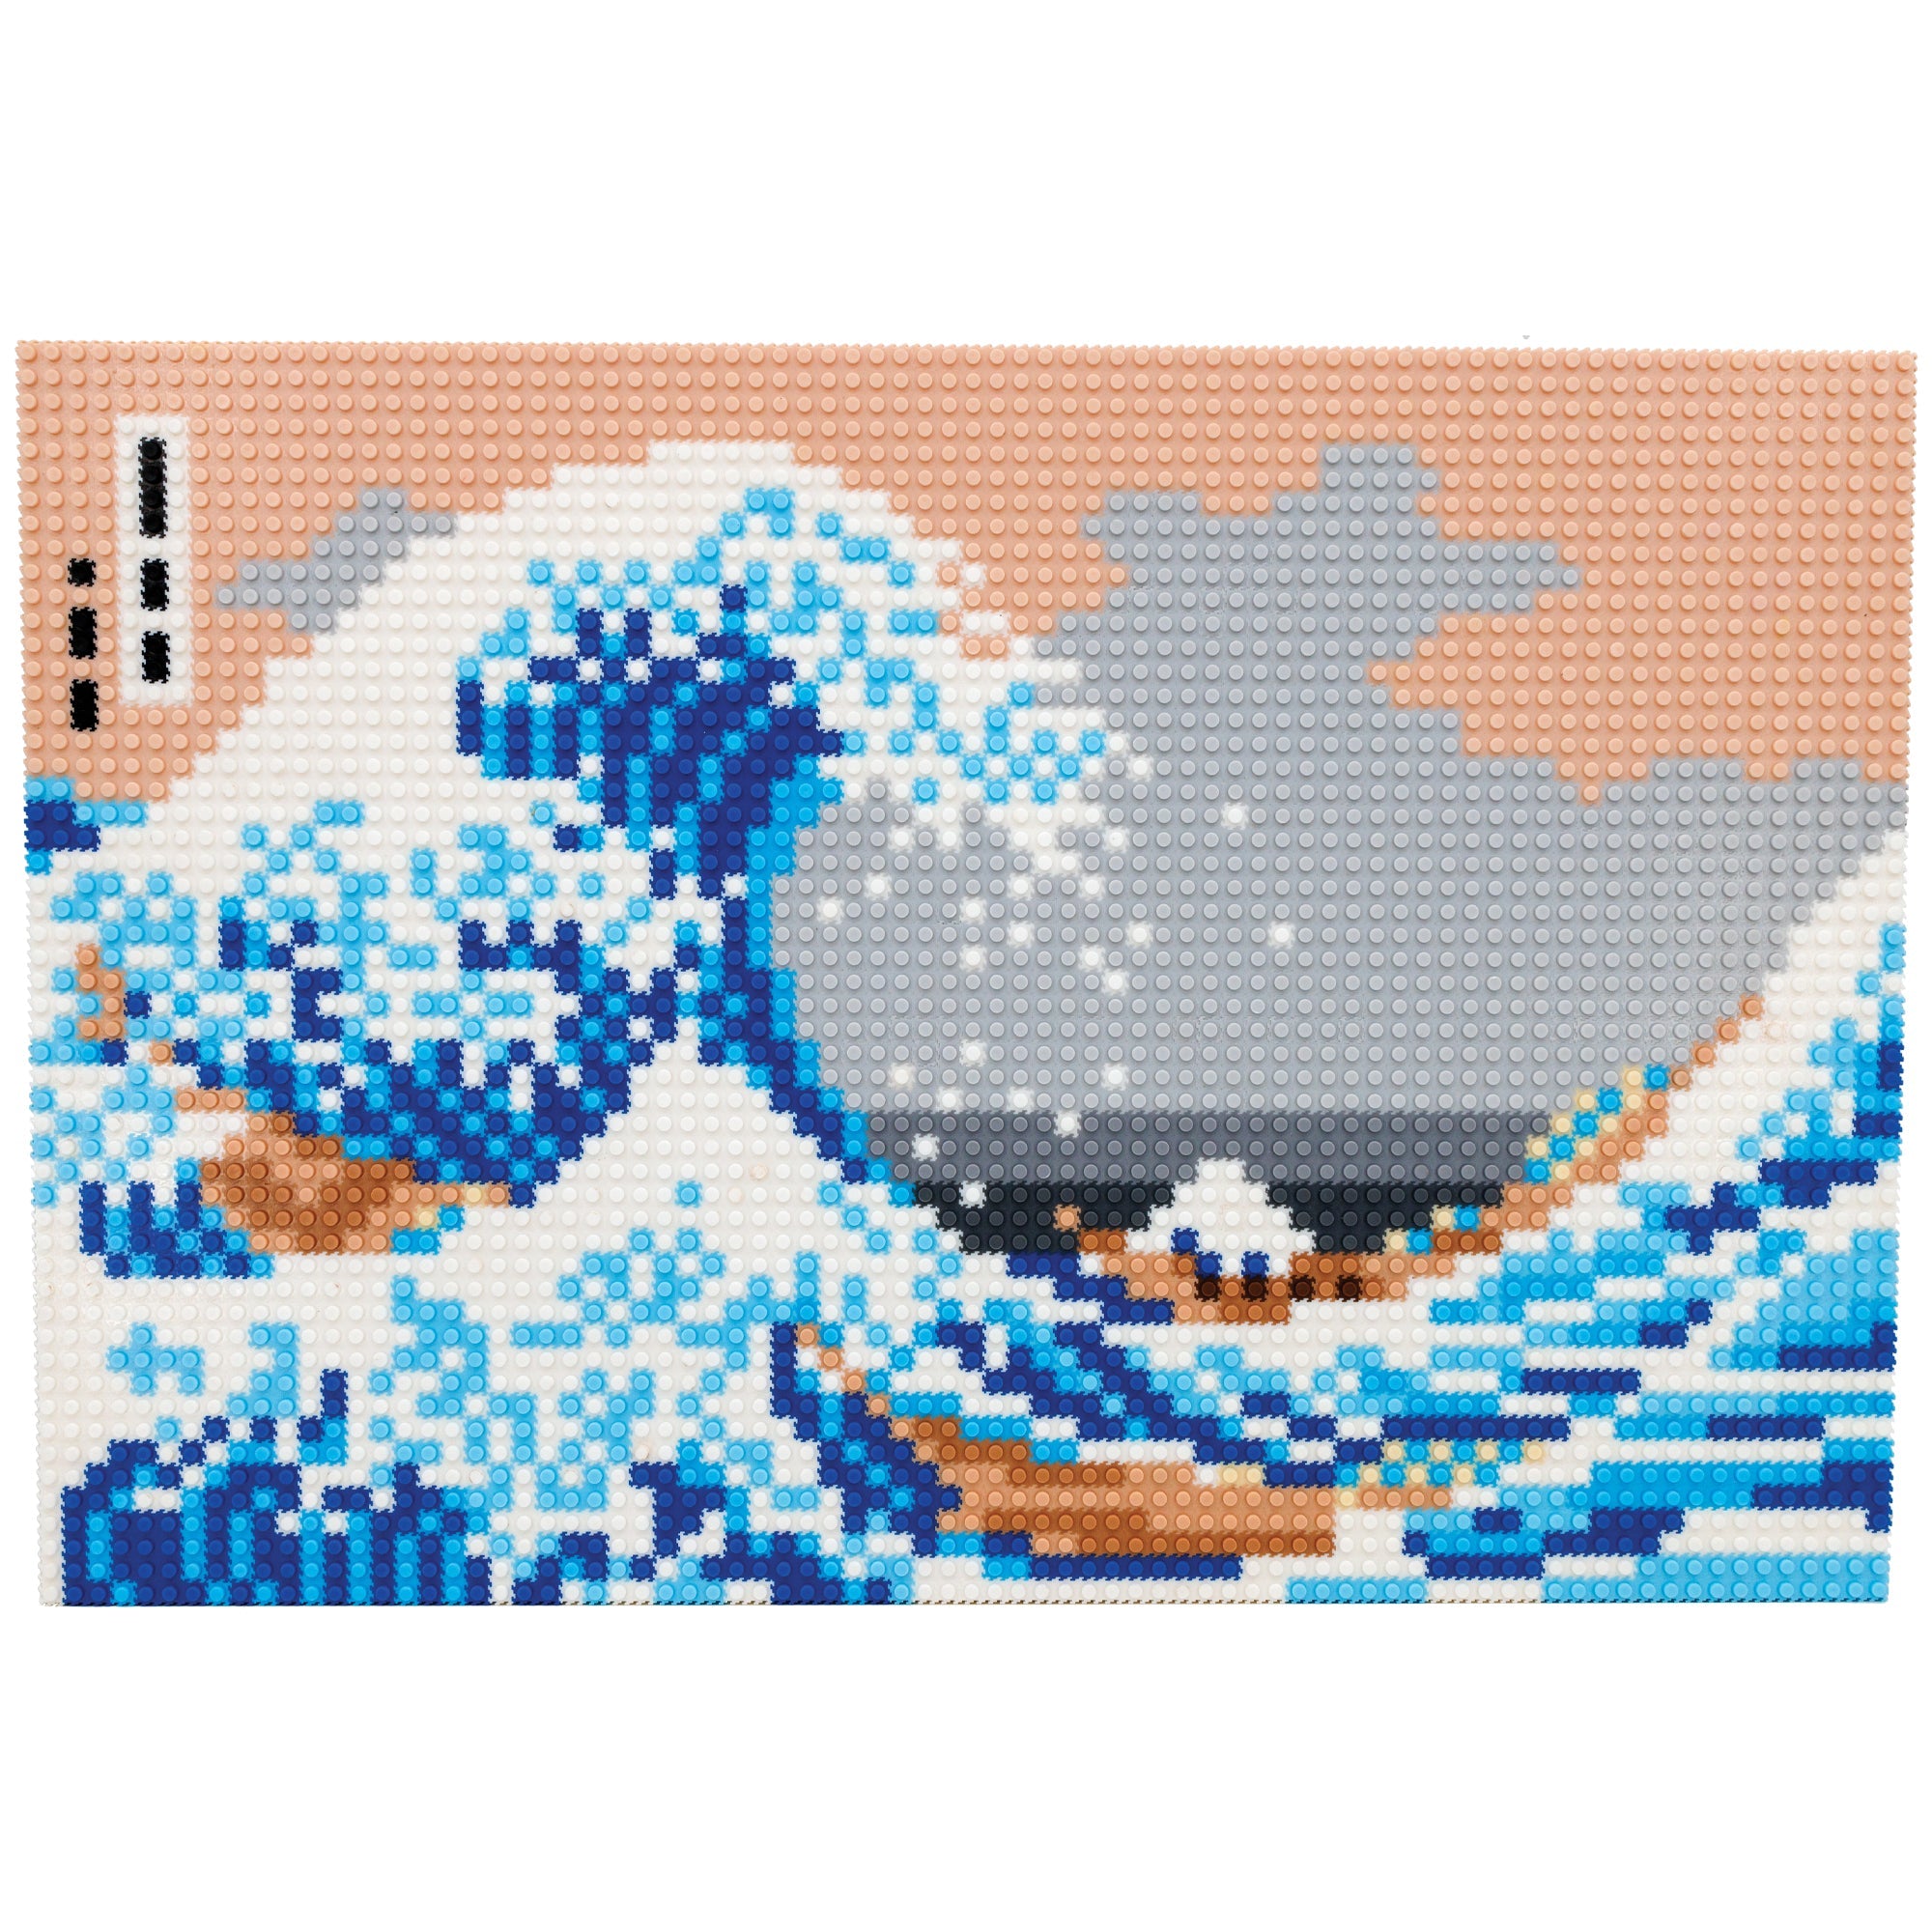 The Great Wave off Kanagawa made of Pix Brix, pixel picture puzzle blocks.